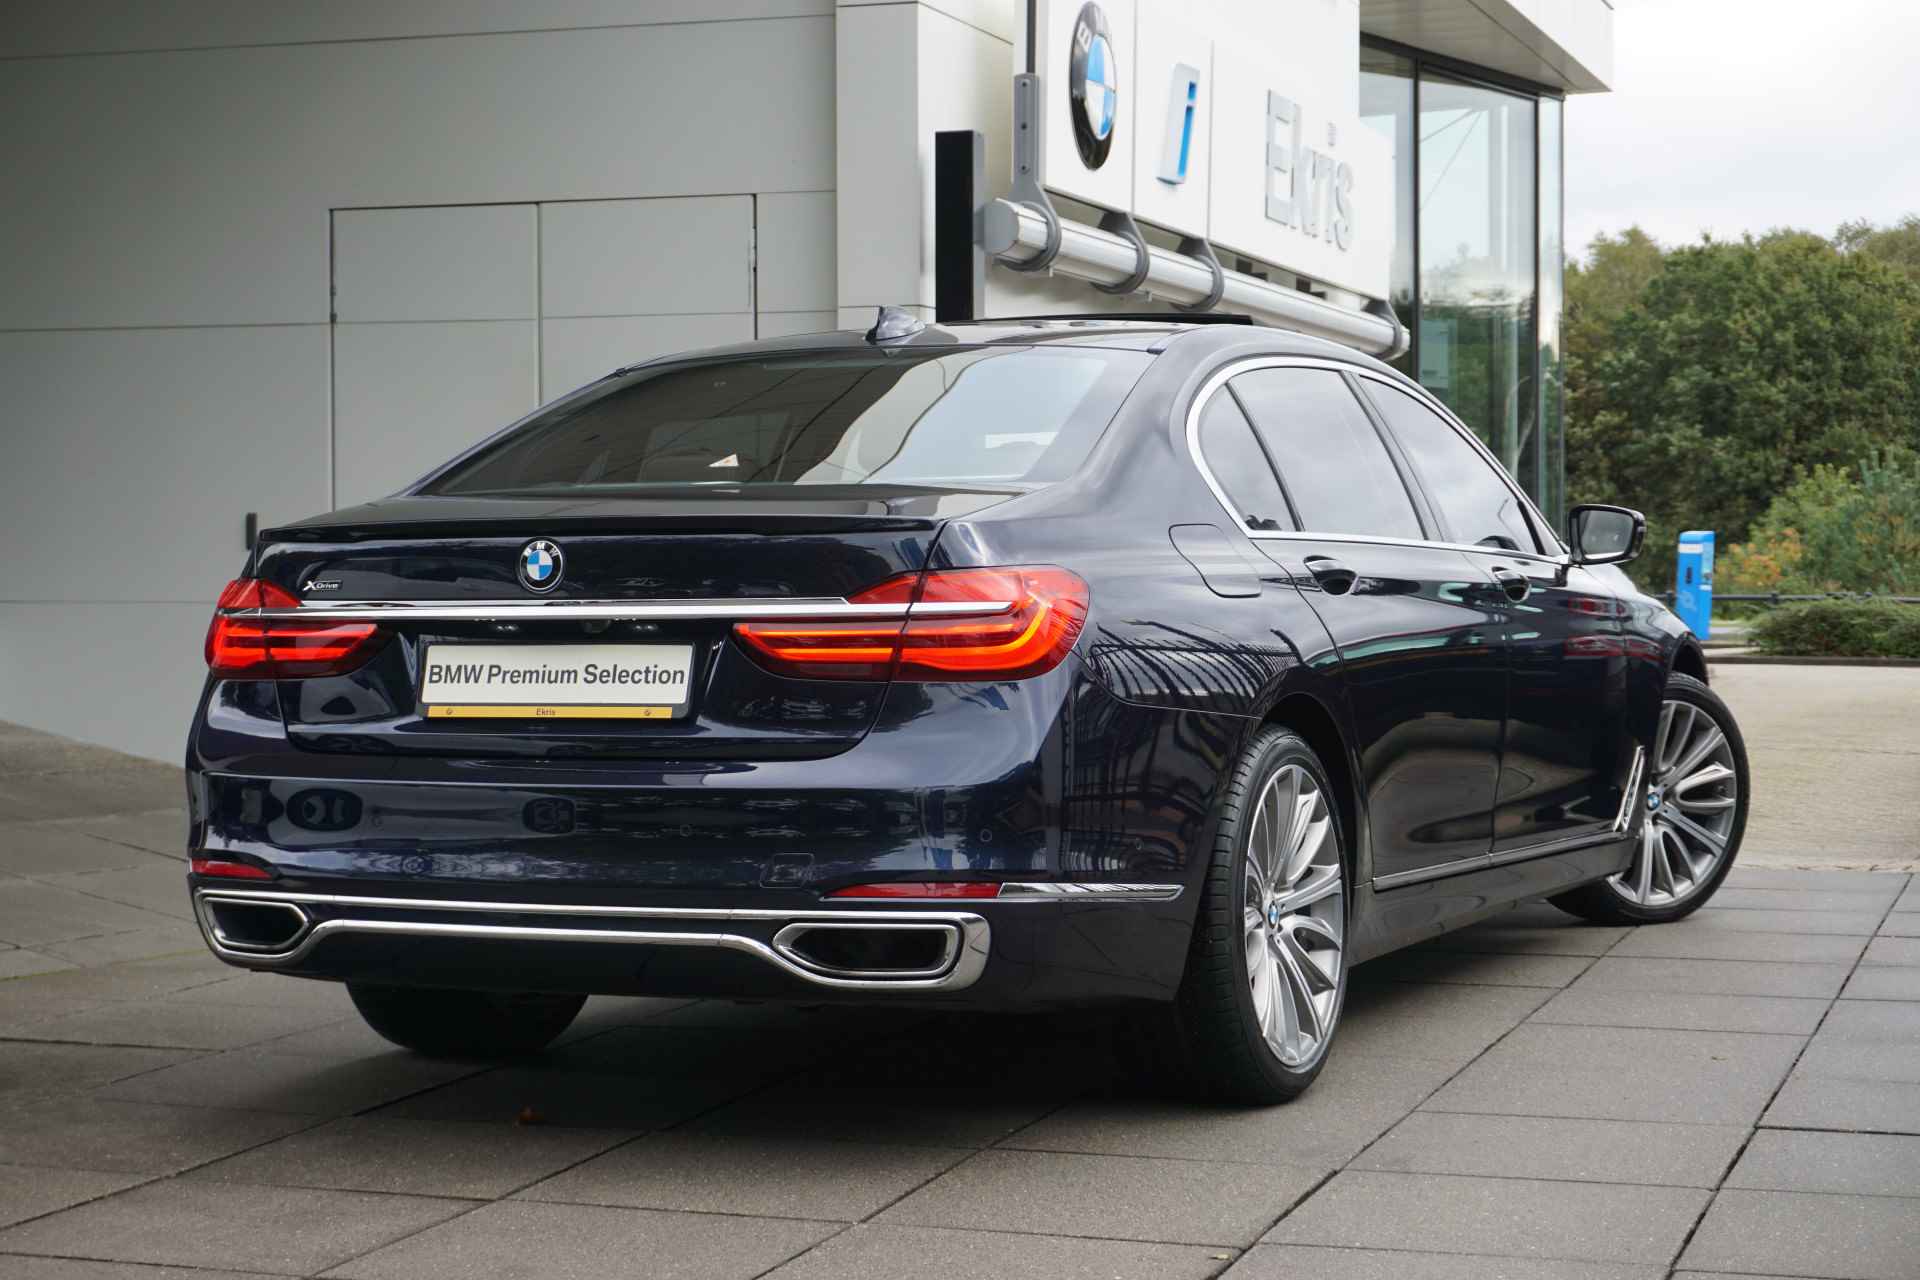 BMW 7 Serie Limousine 750Li xDrive Aut. High Executive / Pure Excellence / B&W Sound / Executive Lounge / Active Steering / Laserlight - 2/47